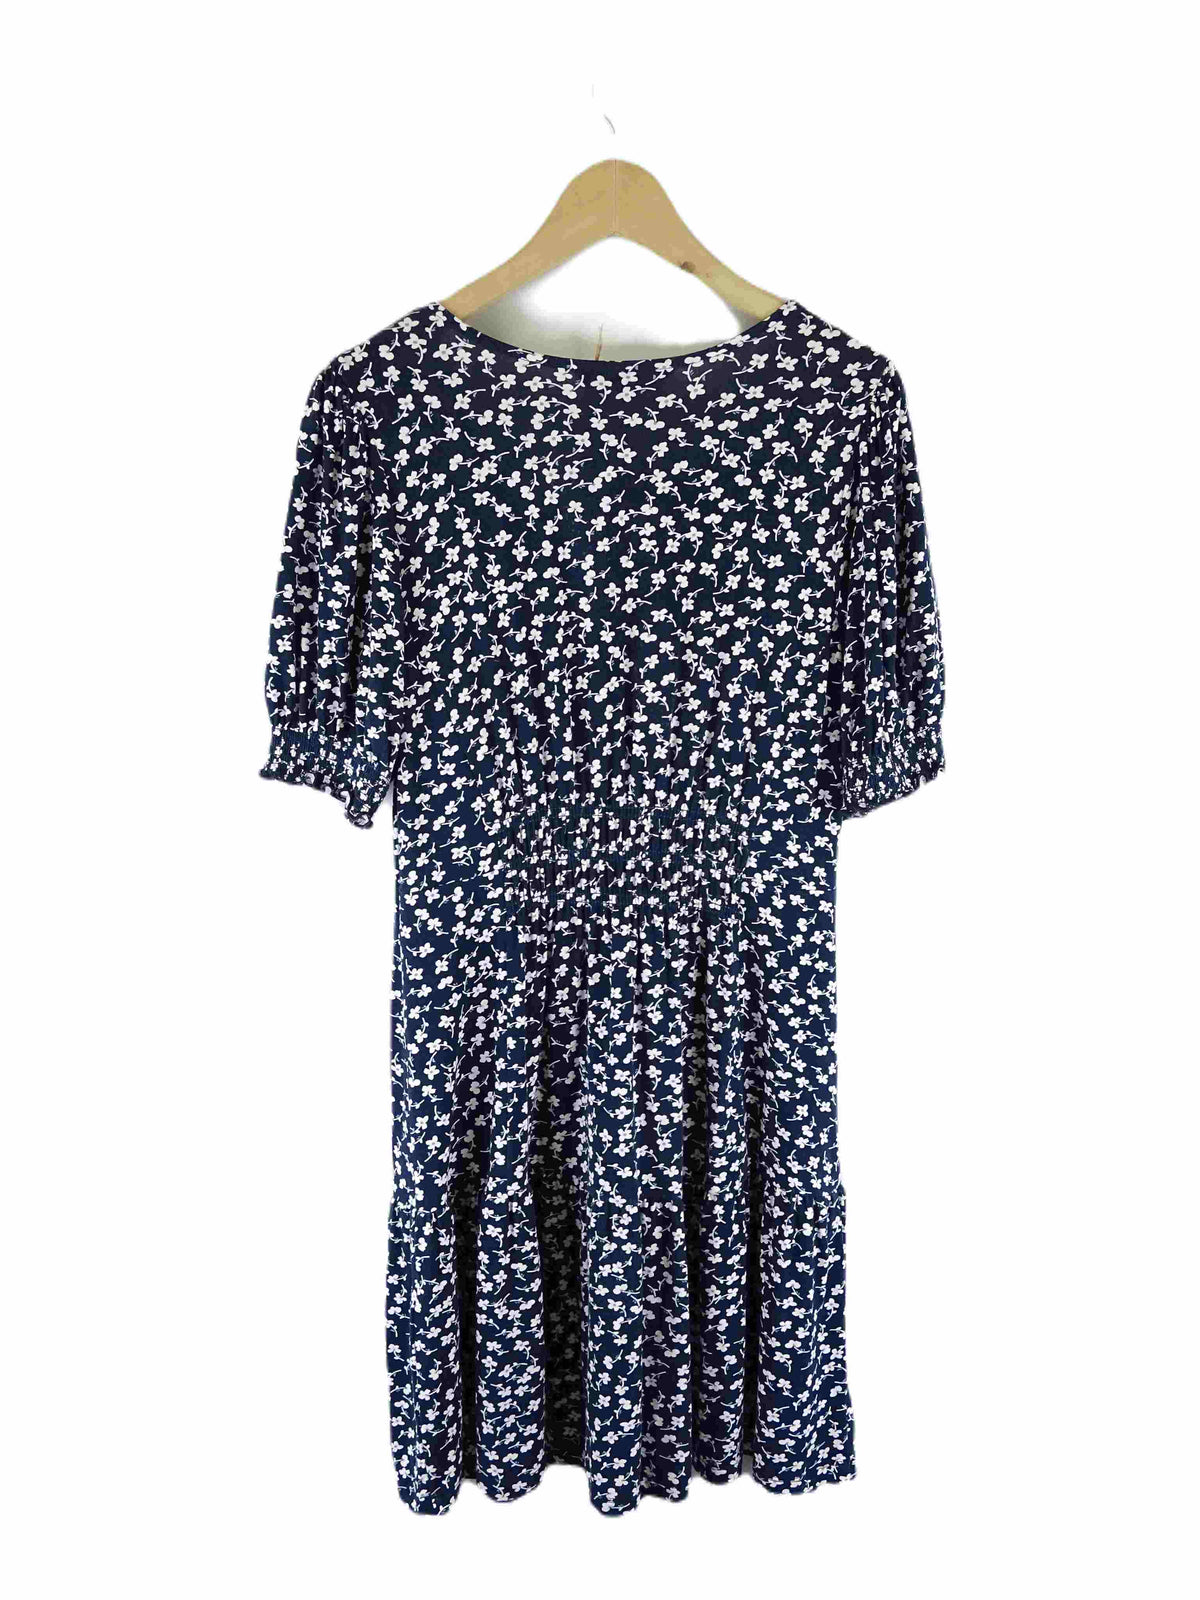 French Connection Navy Floral Dress 8